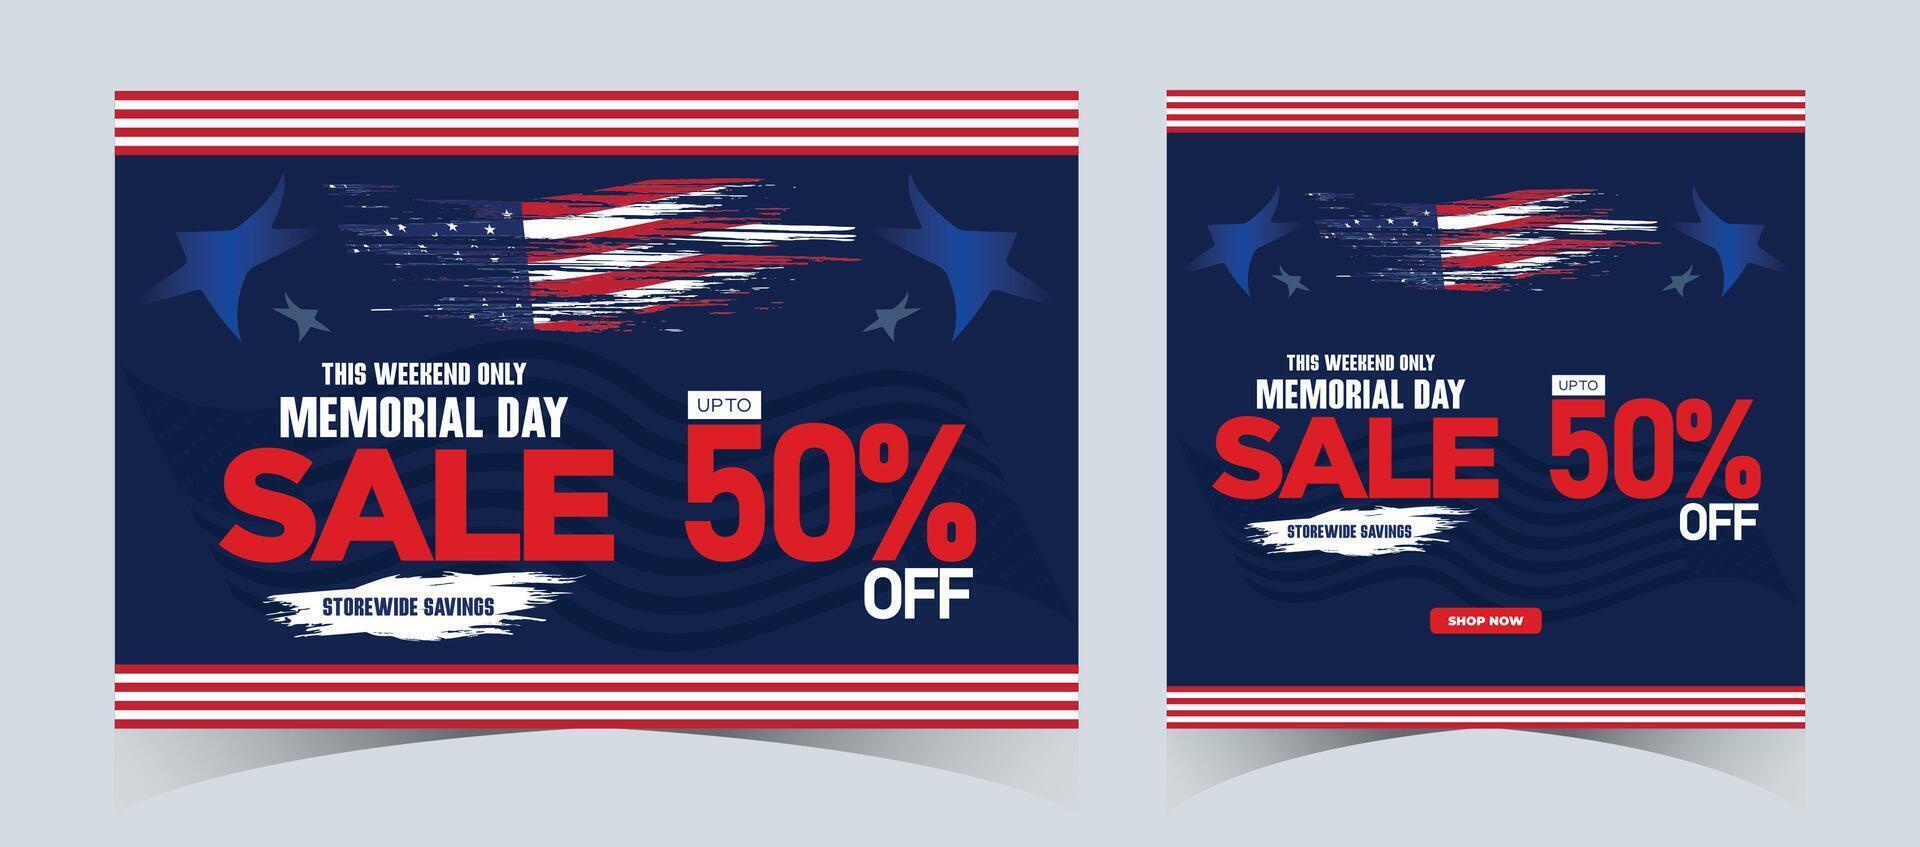 Set of memorial day sale web banner. Happy memorial day holiday sale post. Memorial day weekend sale banner. Memorial Day social media promotion template design in USA national flag colors vector